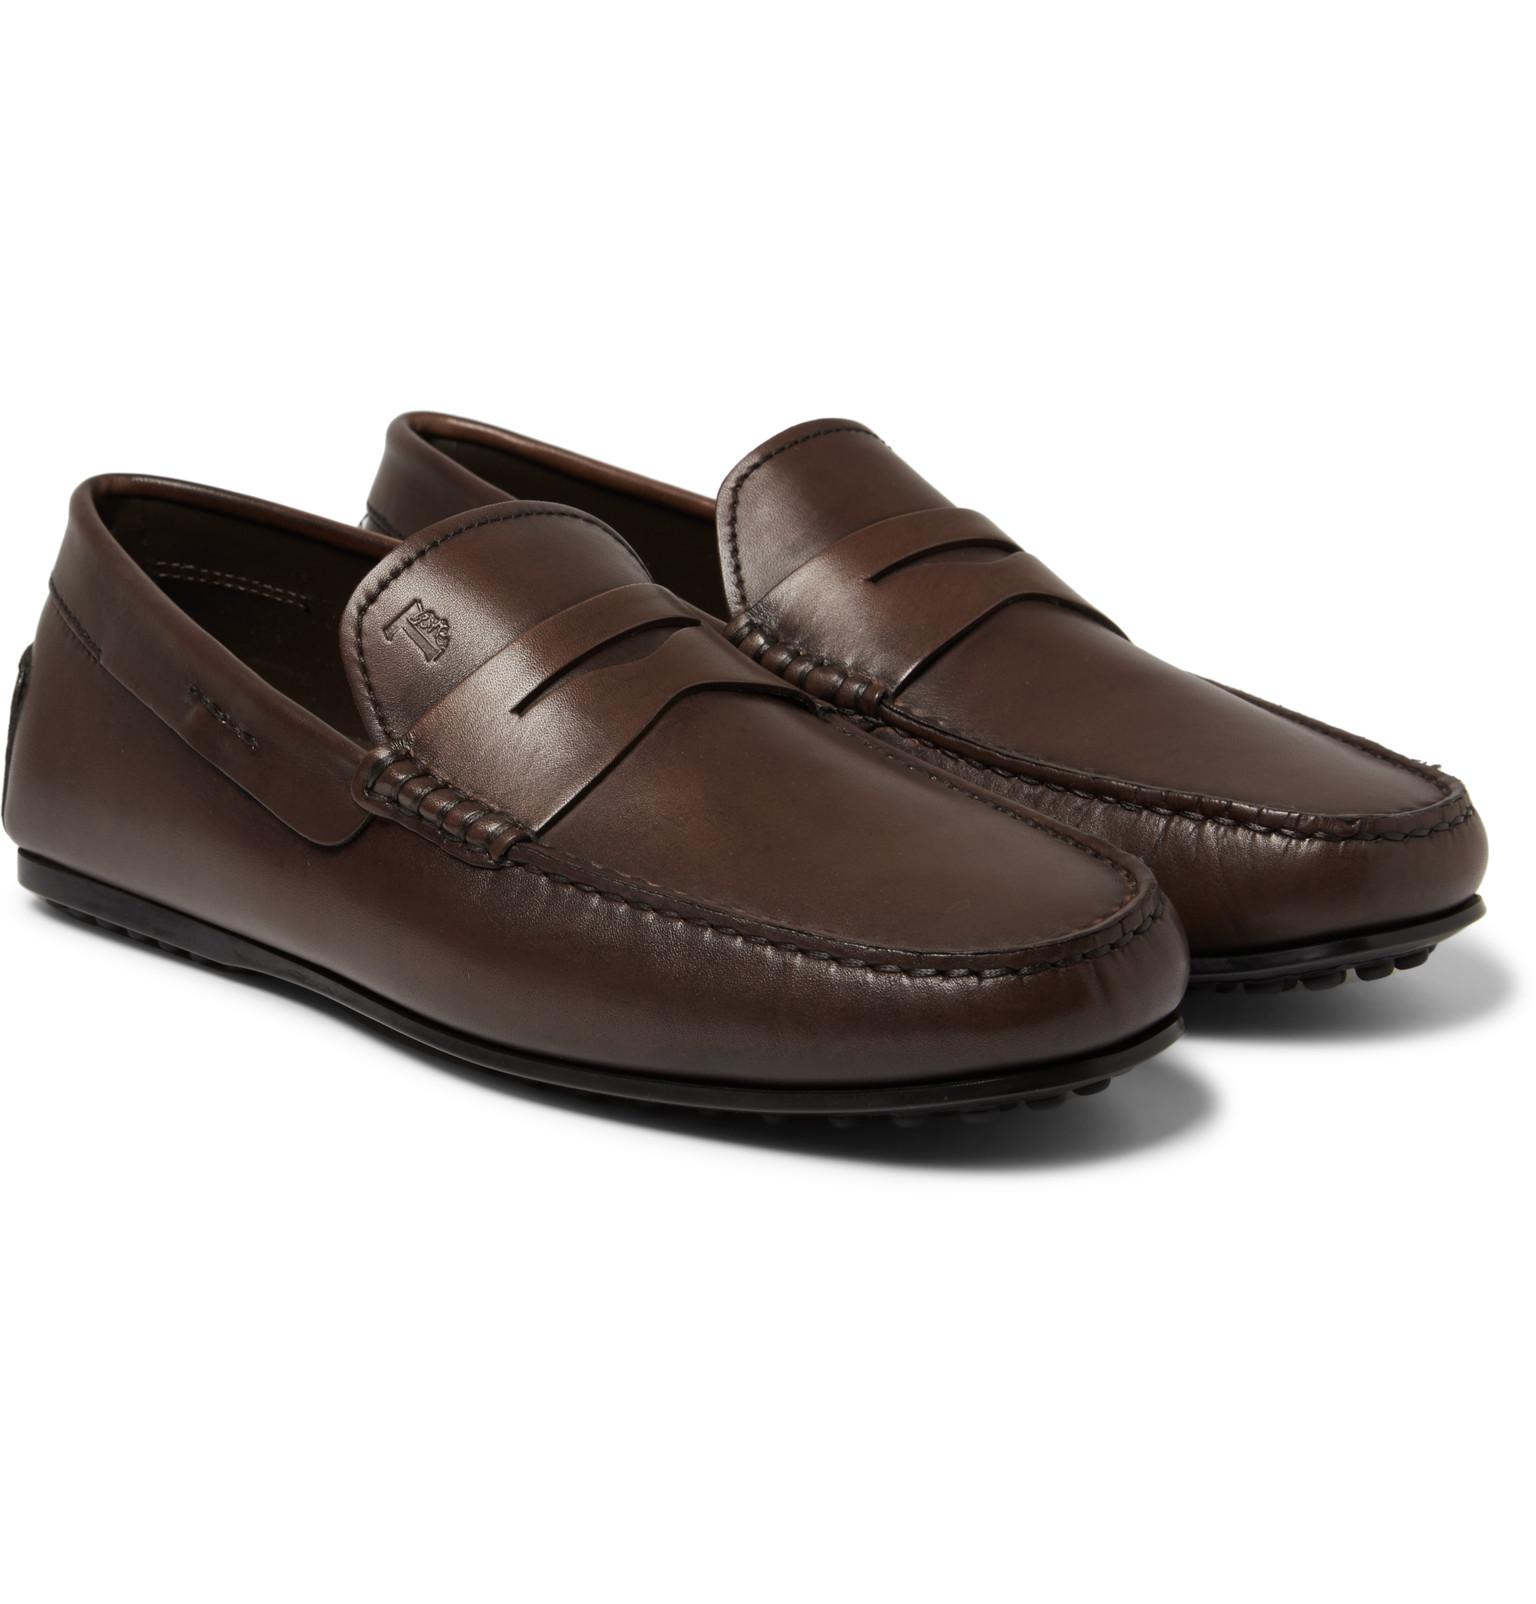 Lyst - Tod'S City Gommino Leather Loafers in Brown for Men